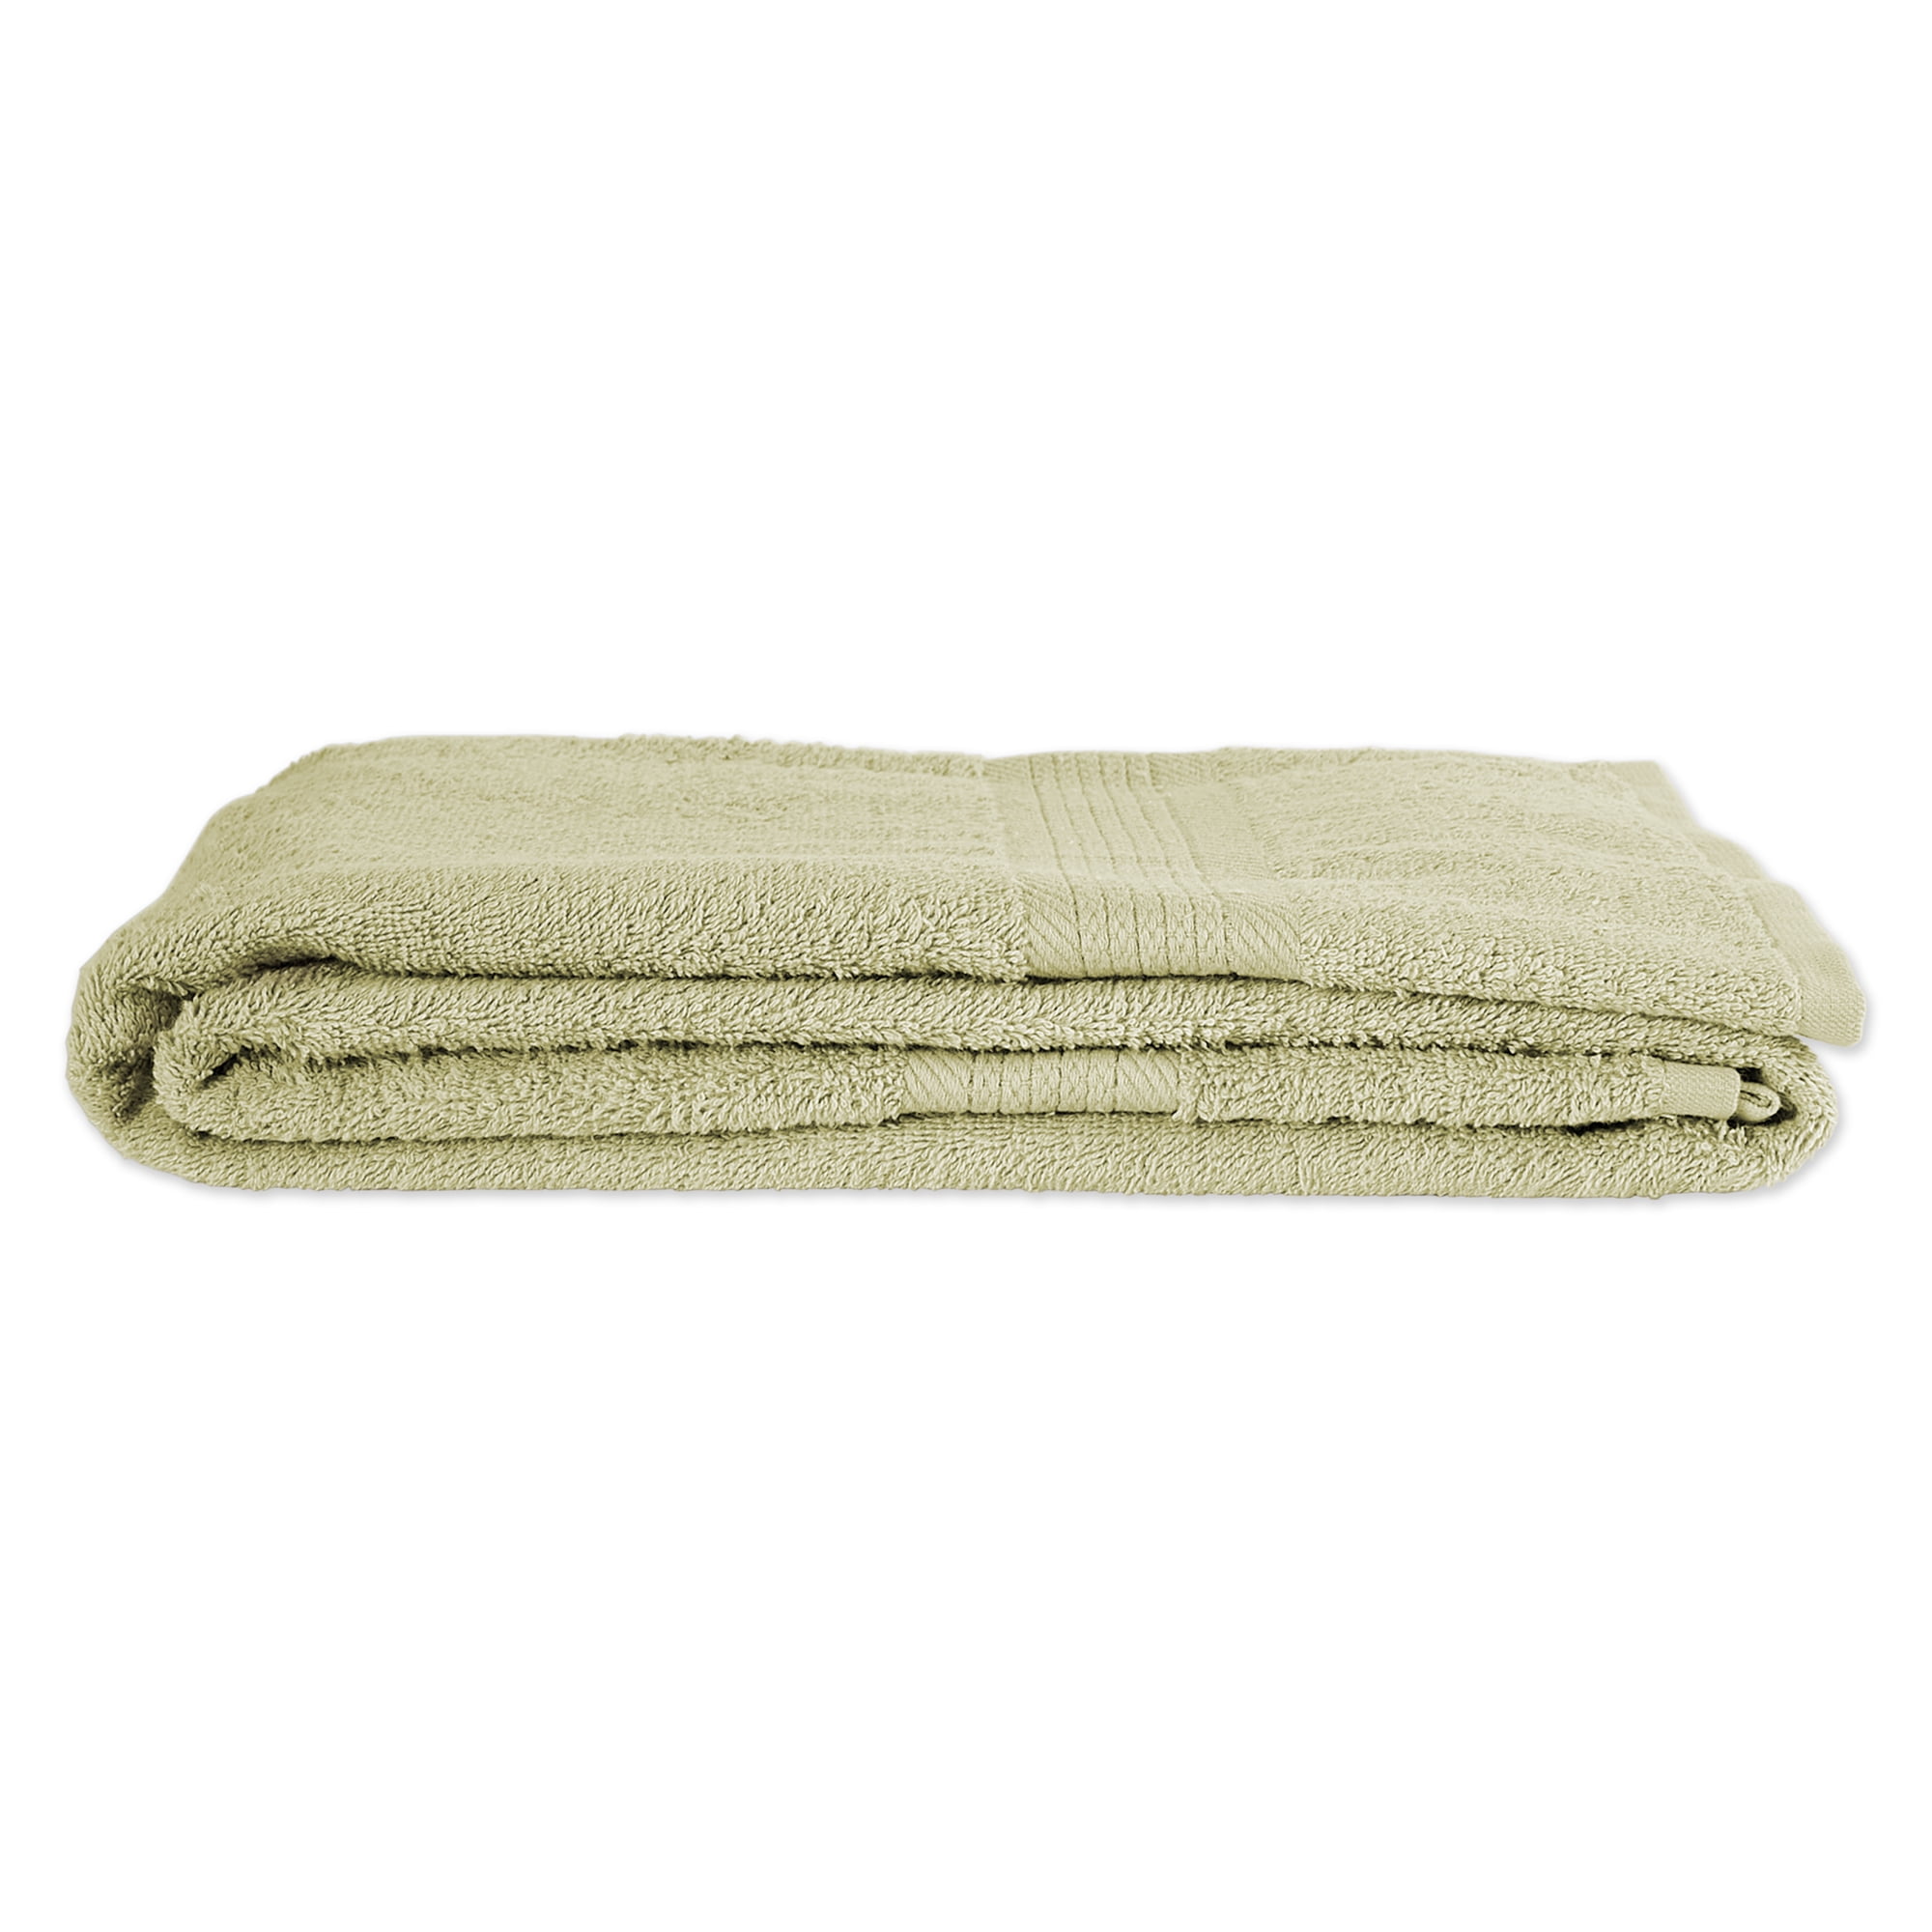 30x60 Super Soft and Ultra Absorbent for Bathroom & Washroom-Yellow Oversized Extra Large Cotton Bath Towel Hotel & Spa Quality